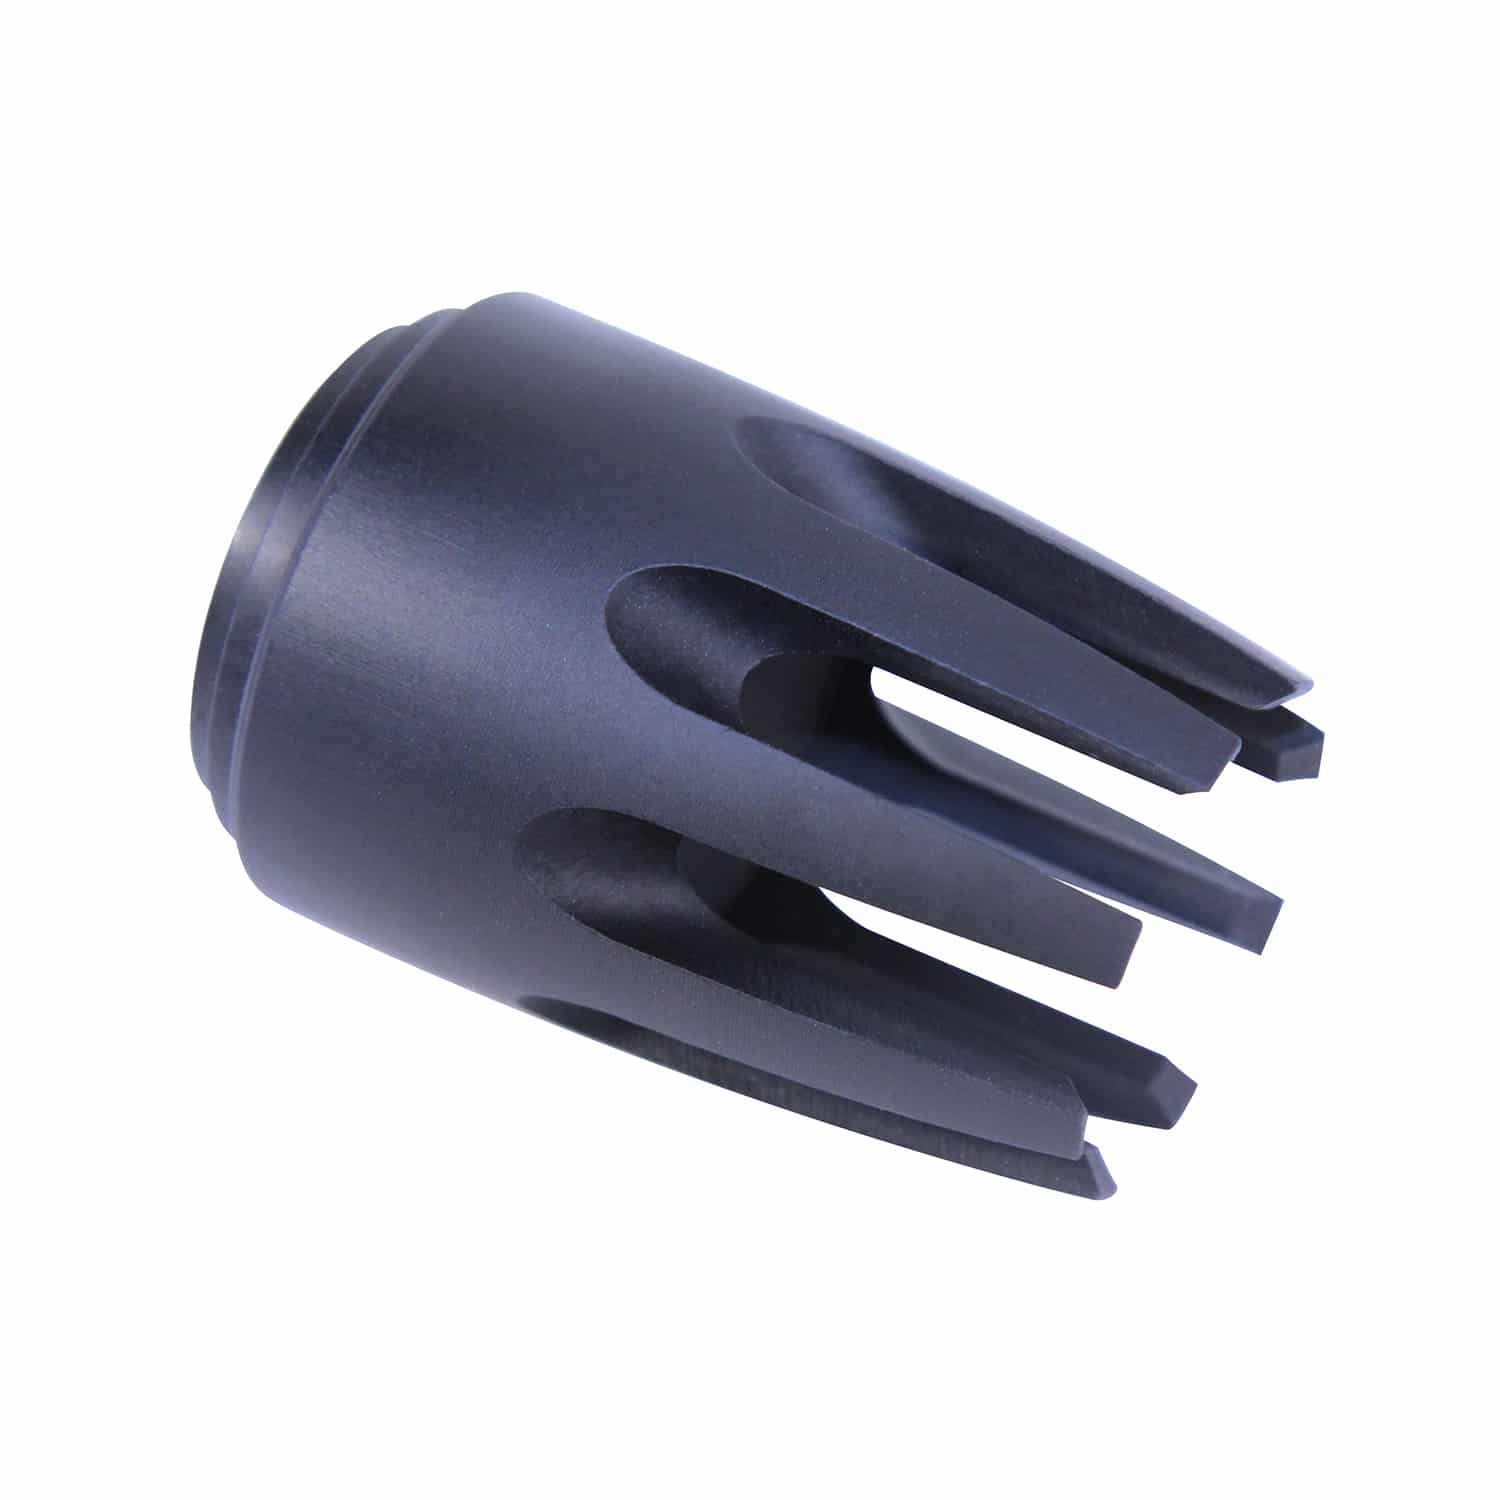 Black anodized AR15 Claw multi-prong flash hider with tactical design